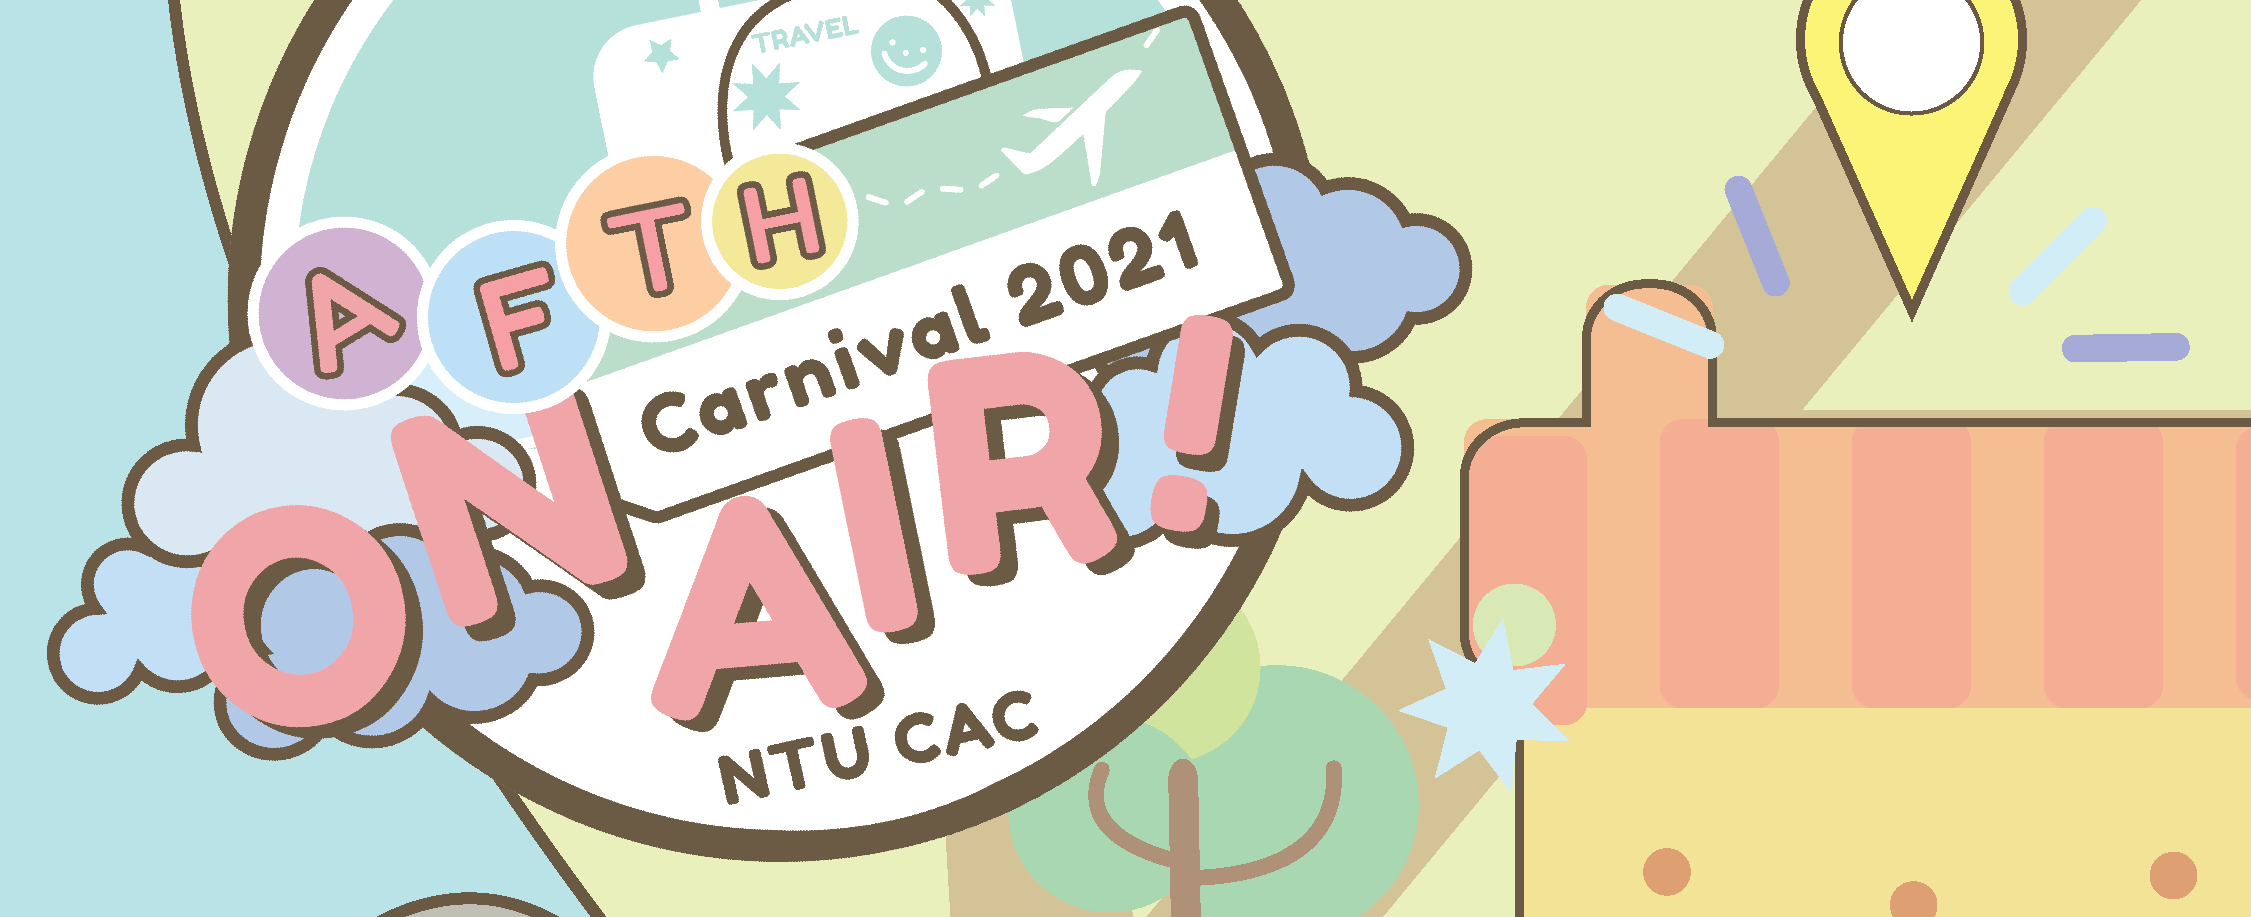 NTU CAC Arts From The Heart